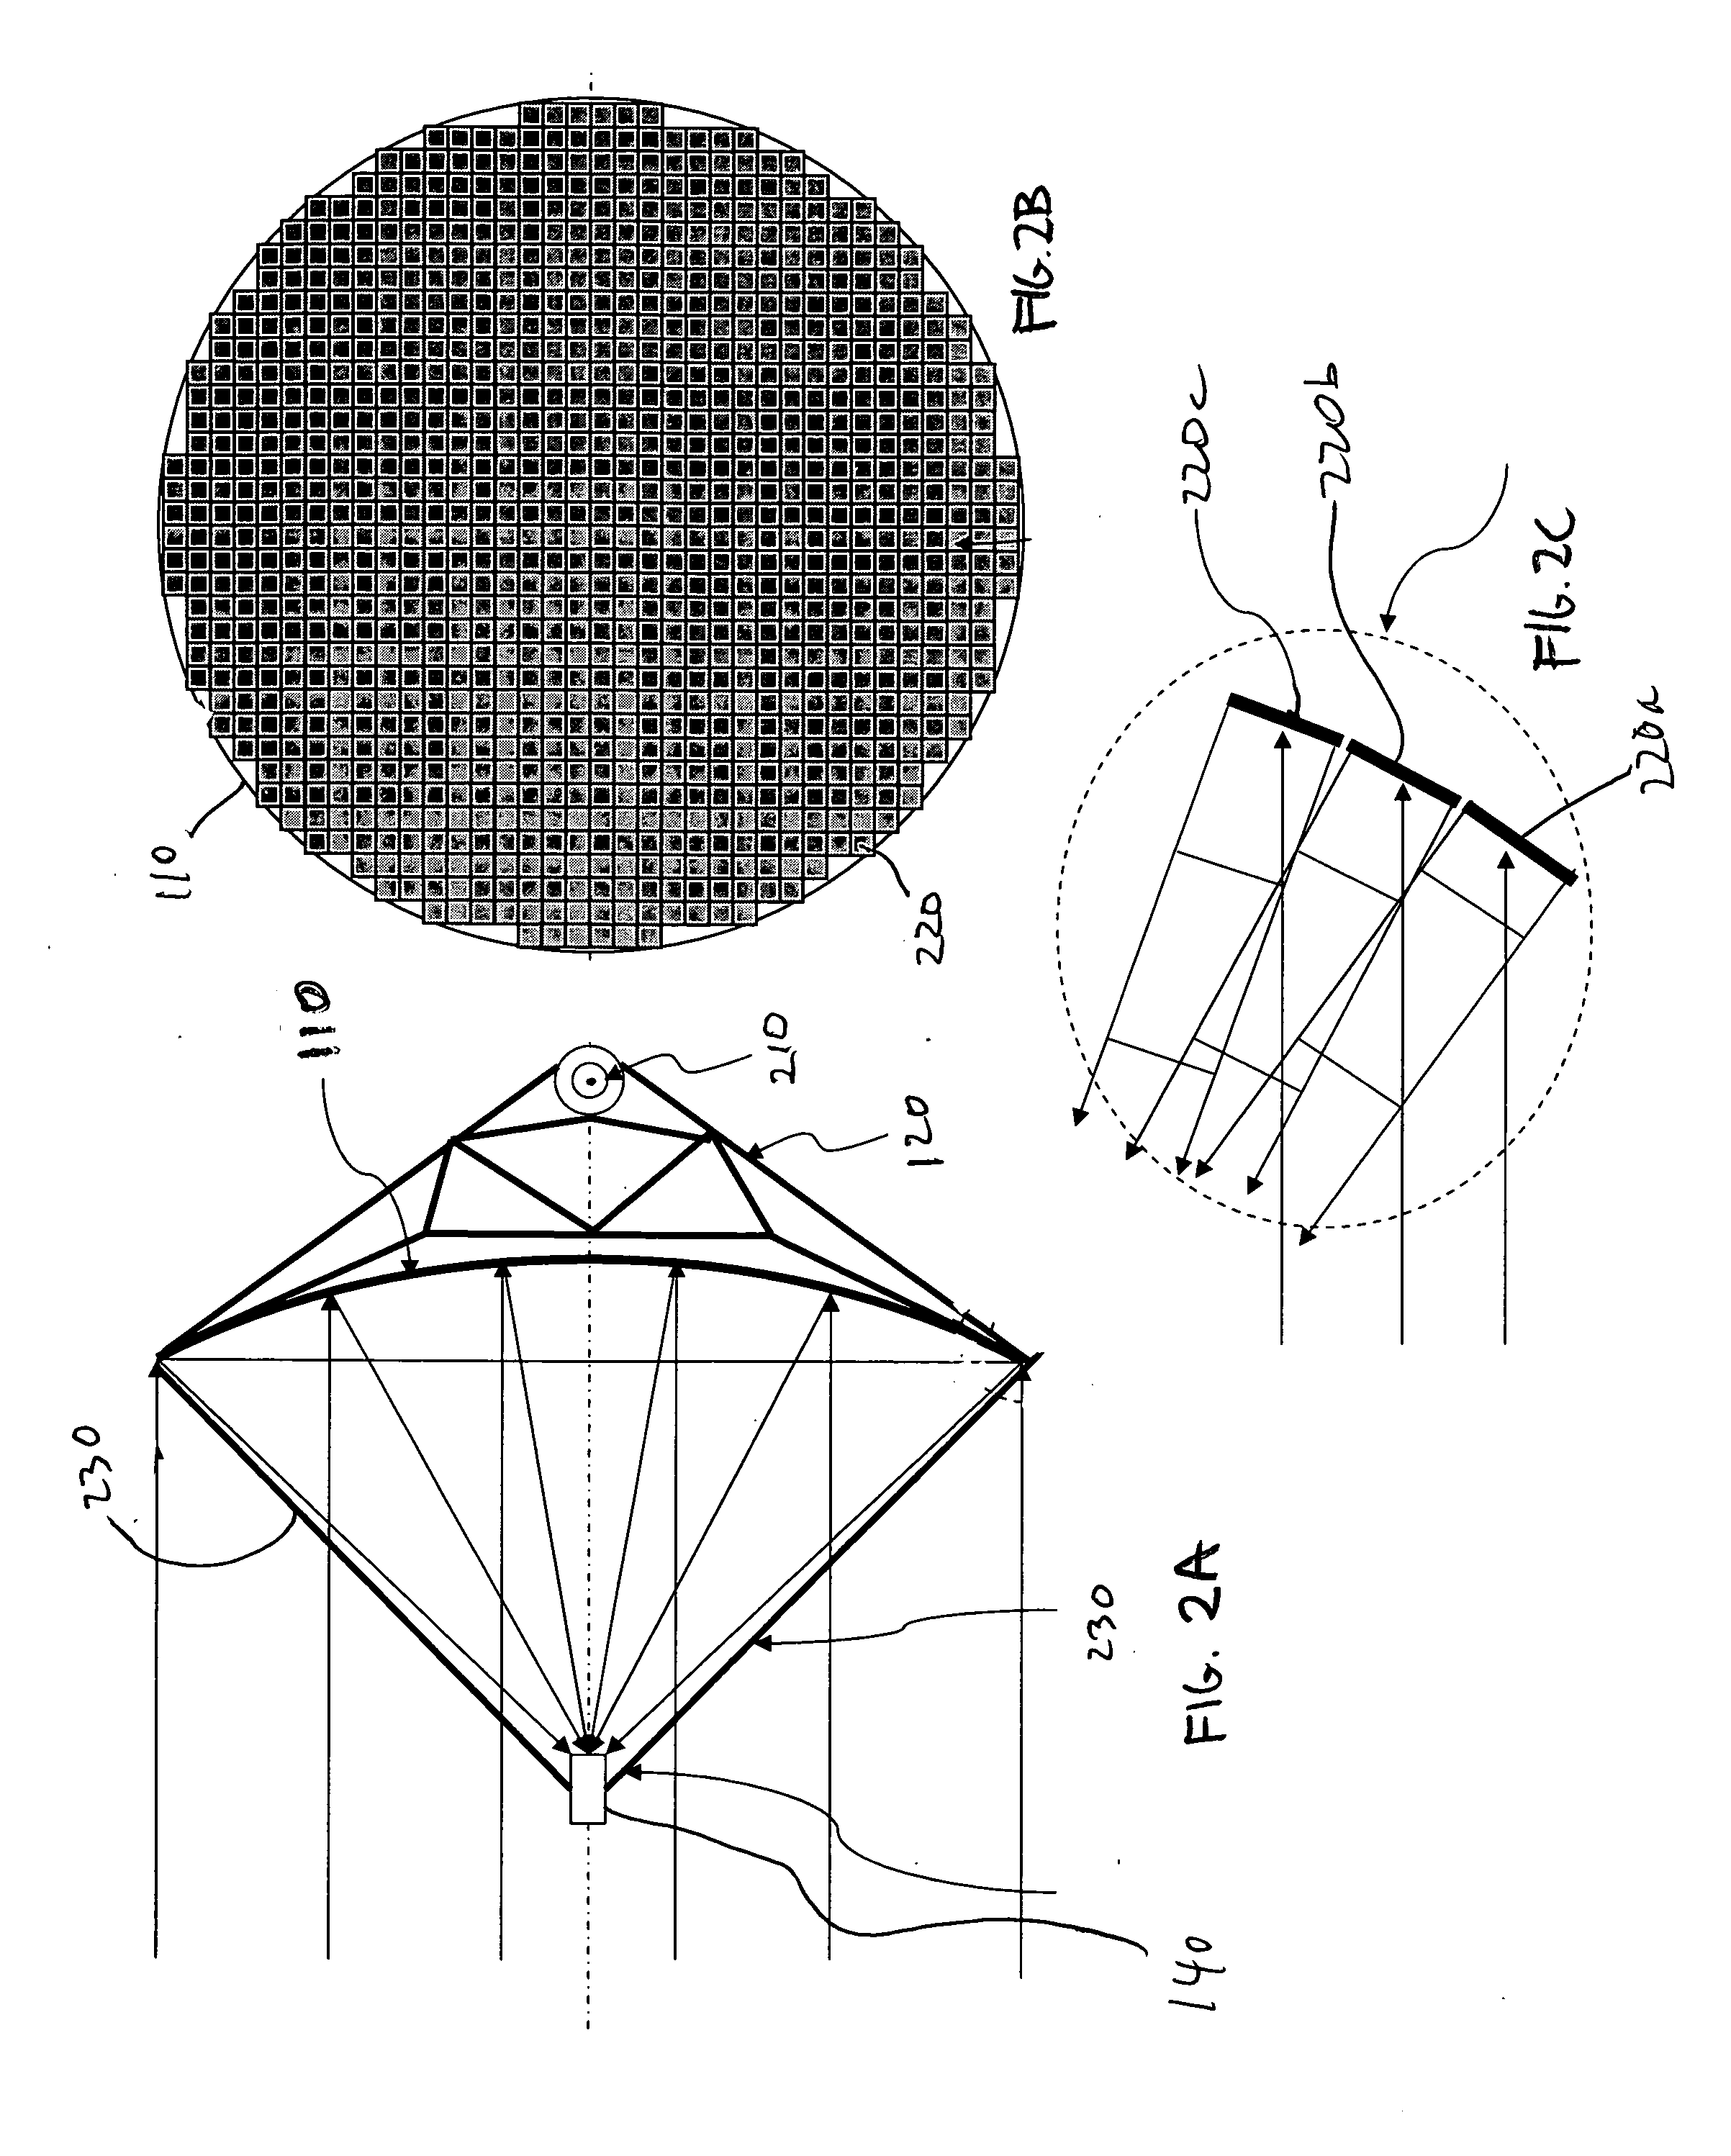 Aligned multiple flat mirror reflector array for concentrating sunlight onto a solar cell